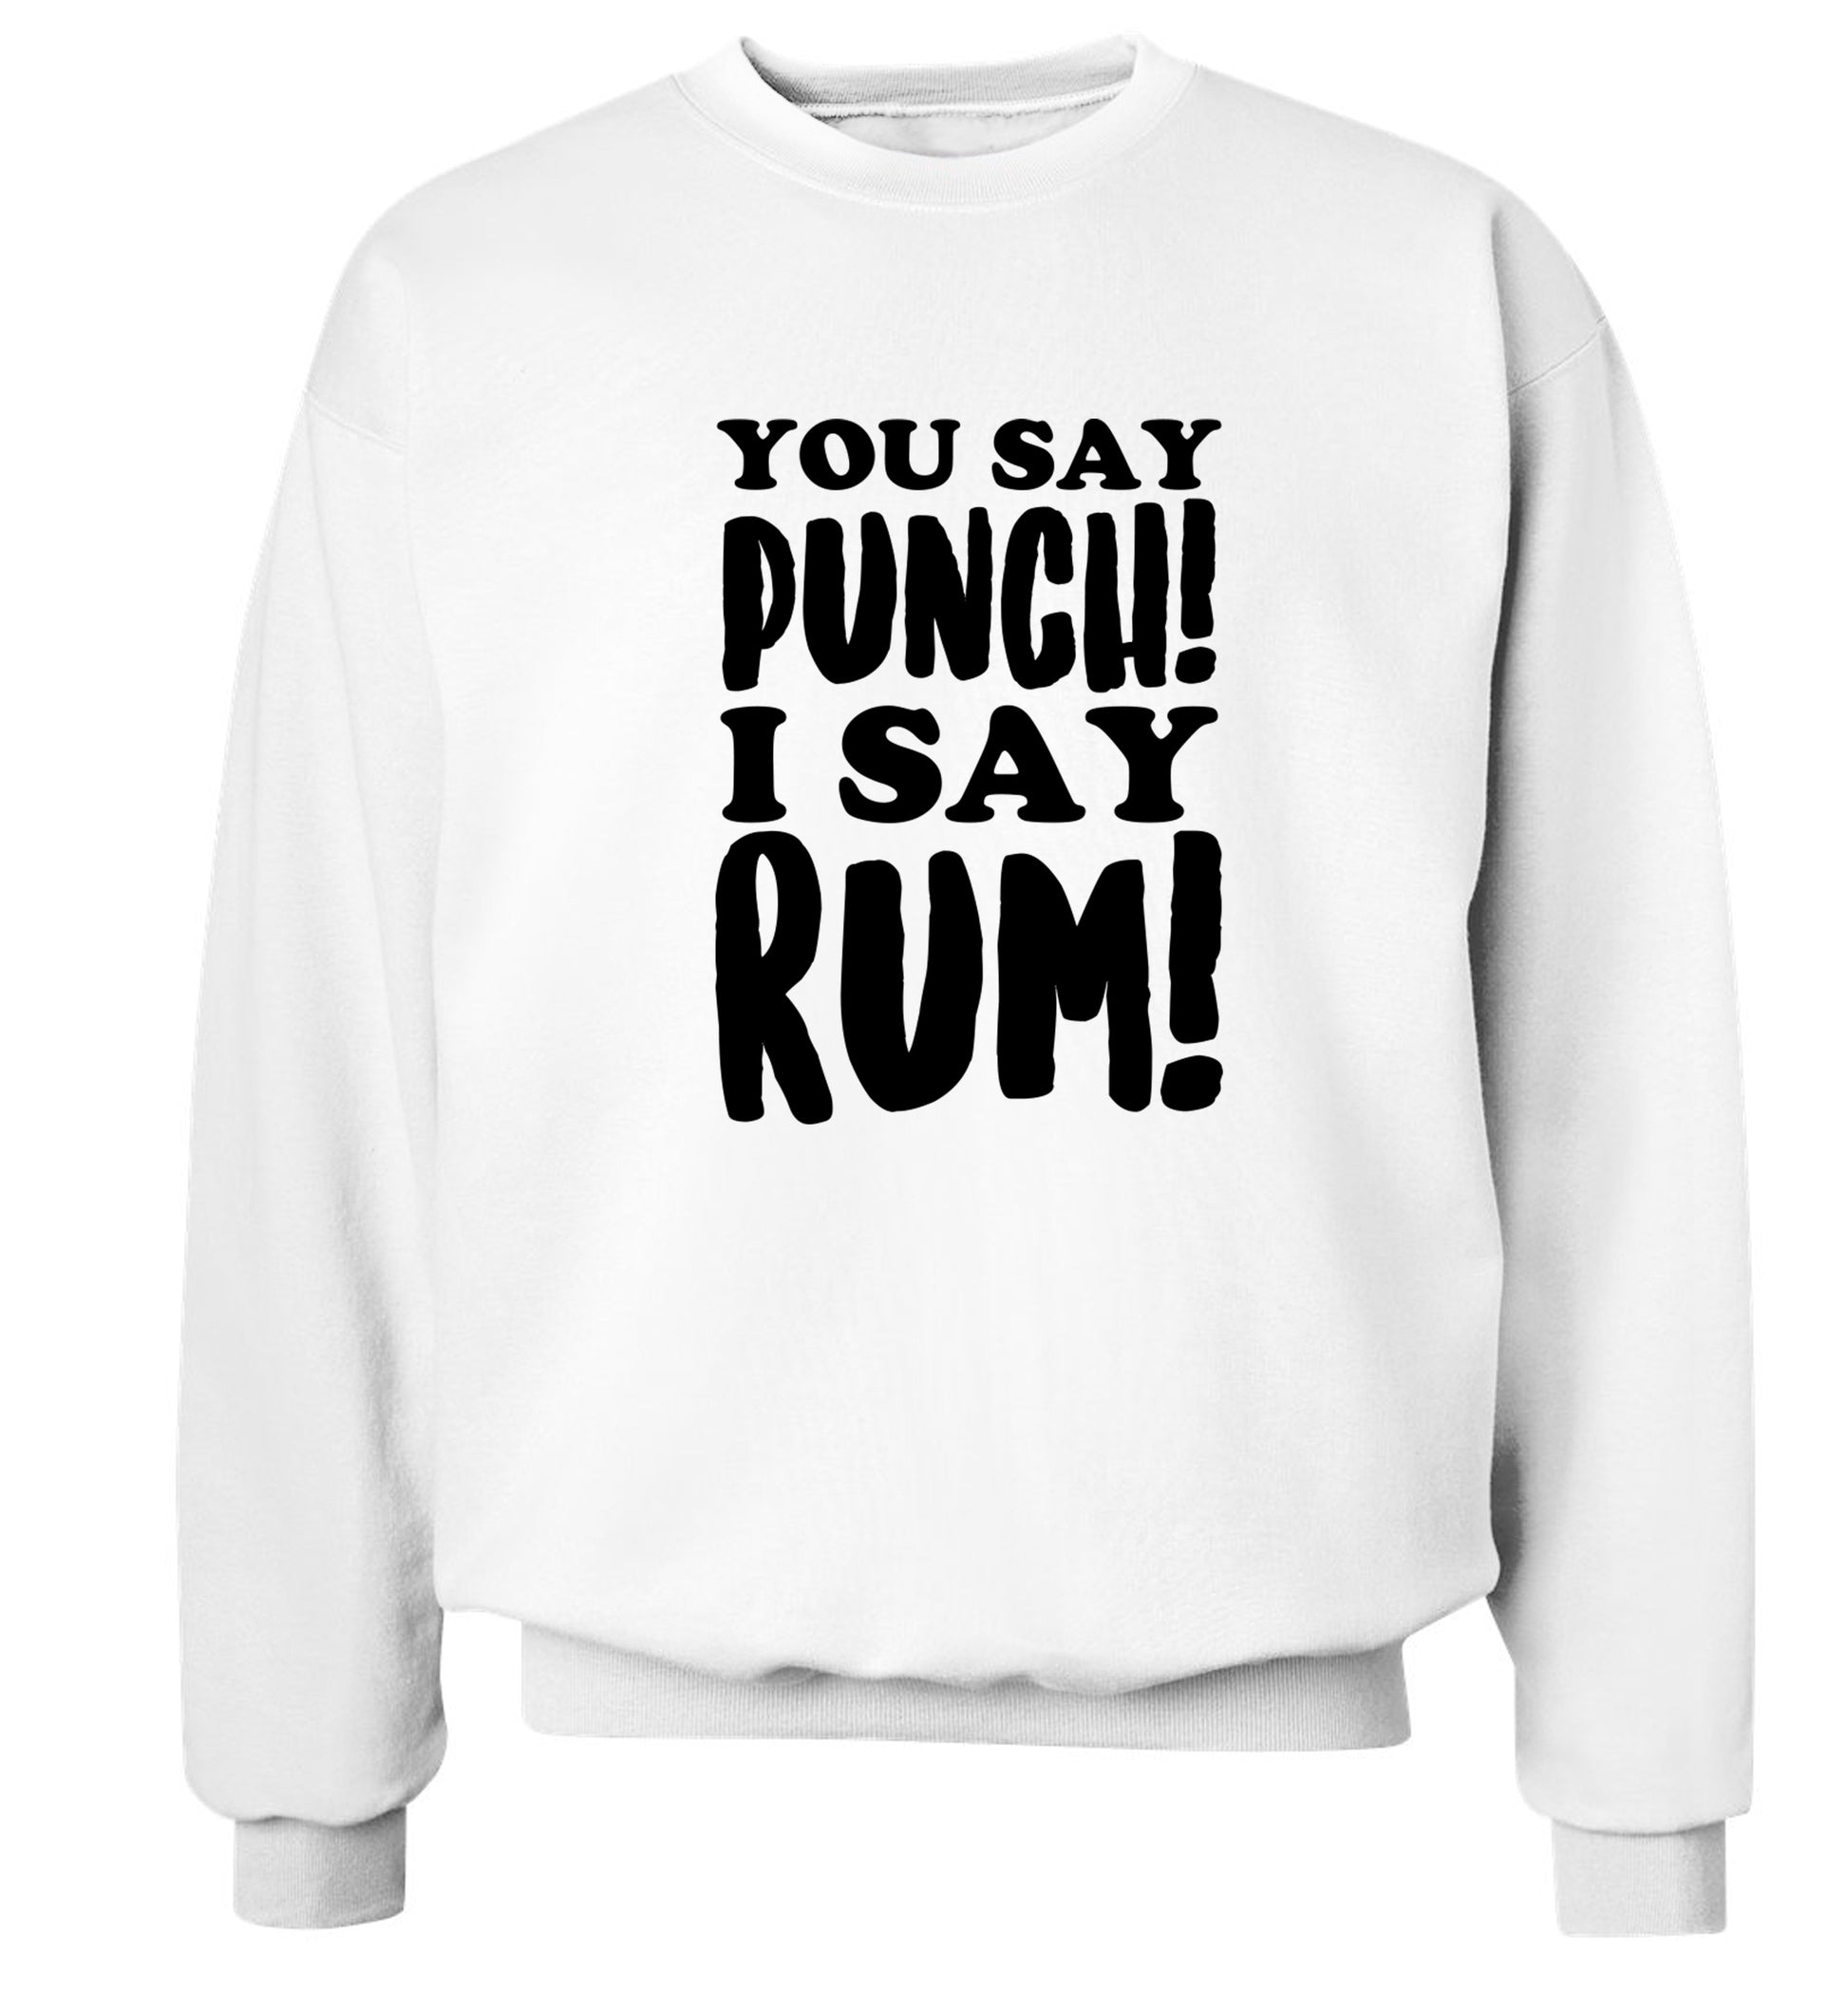 You say punch I say rum! Adult's unisex white Sweater 2XL